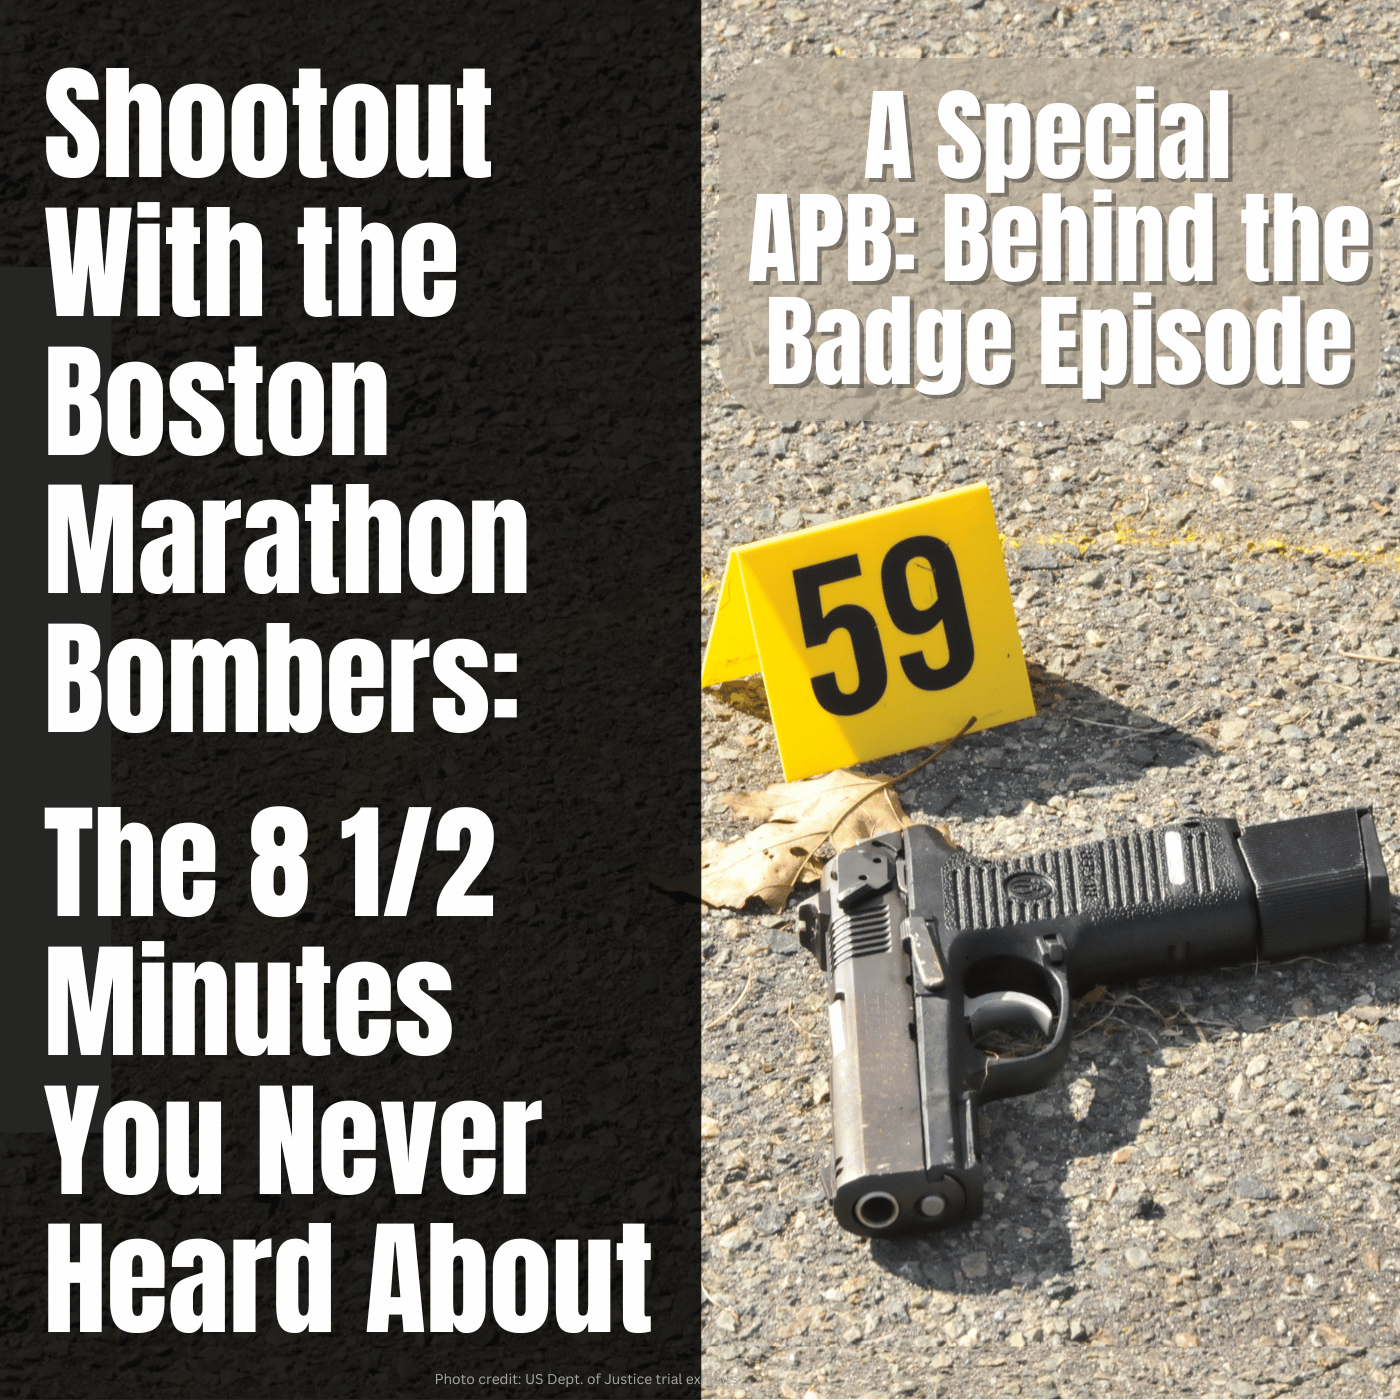 Shootout With the Boston Marathon Bombers: The 8 1/2 Minutes You Never Heard About